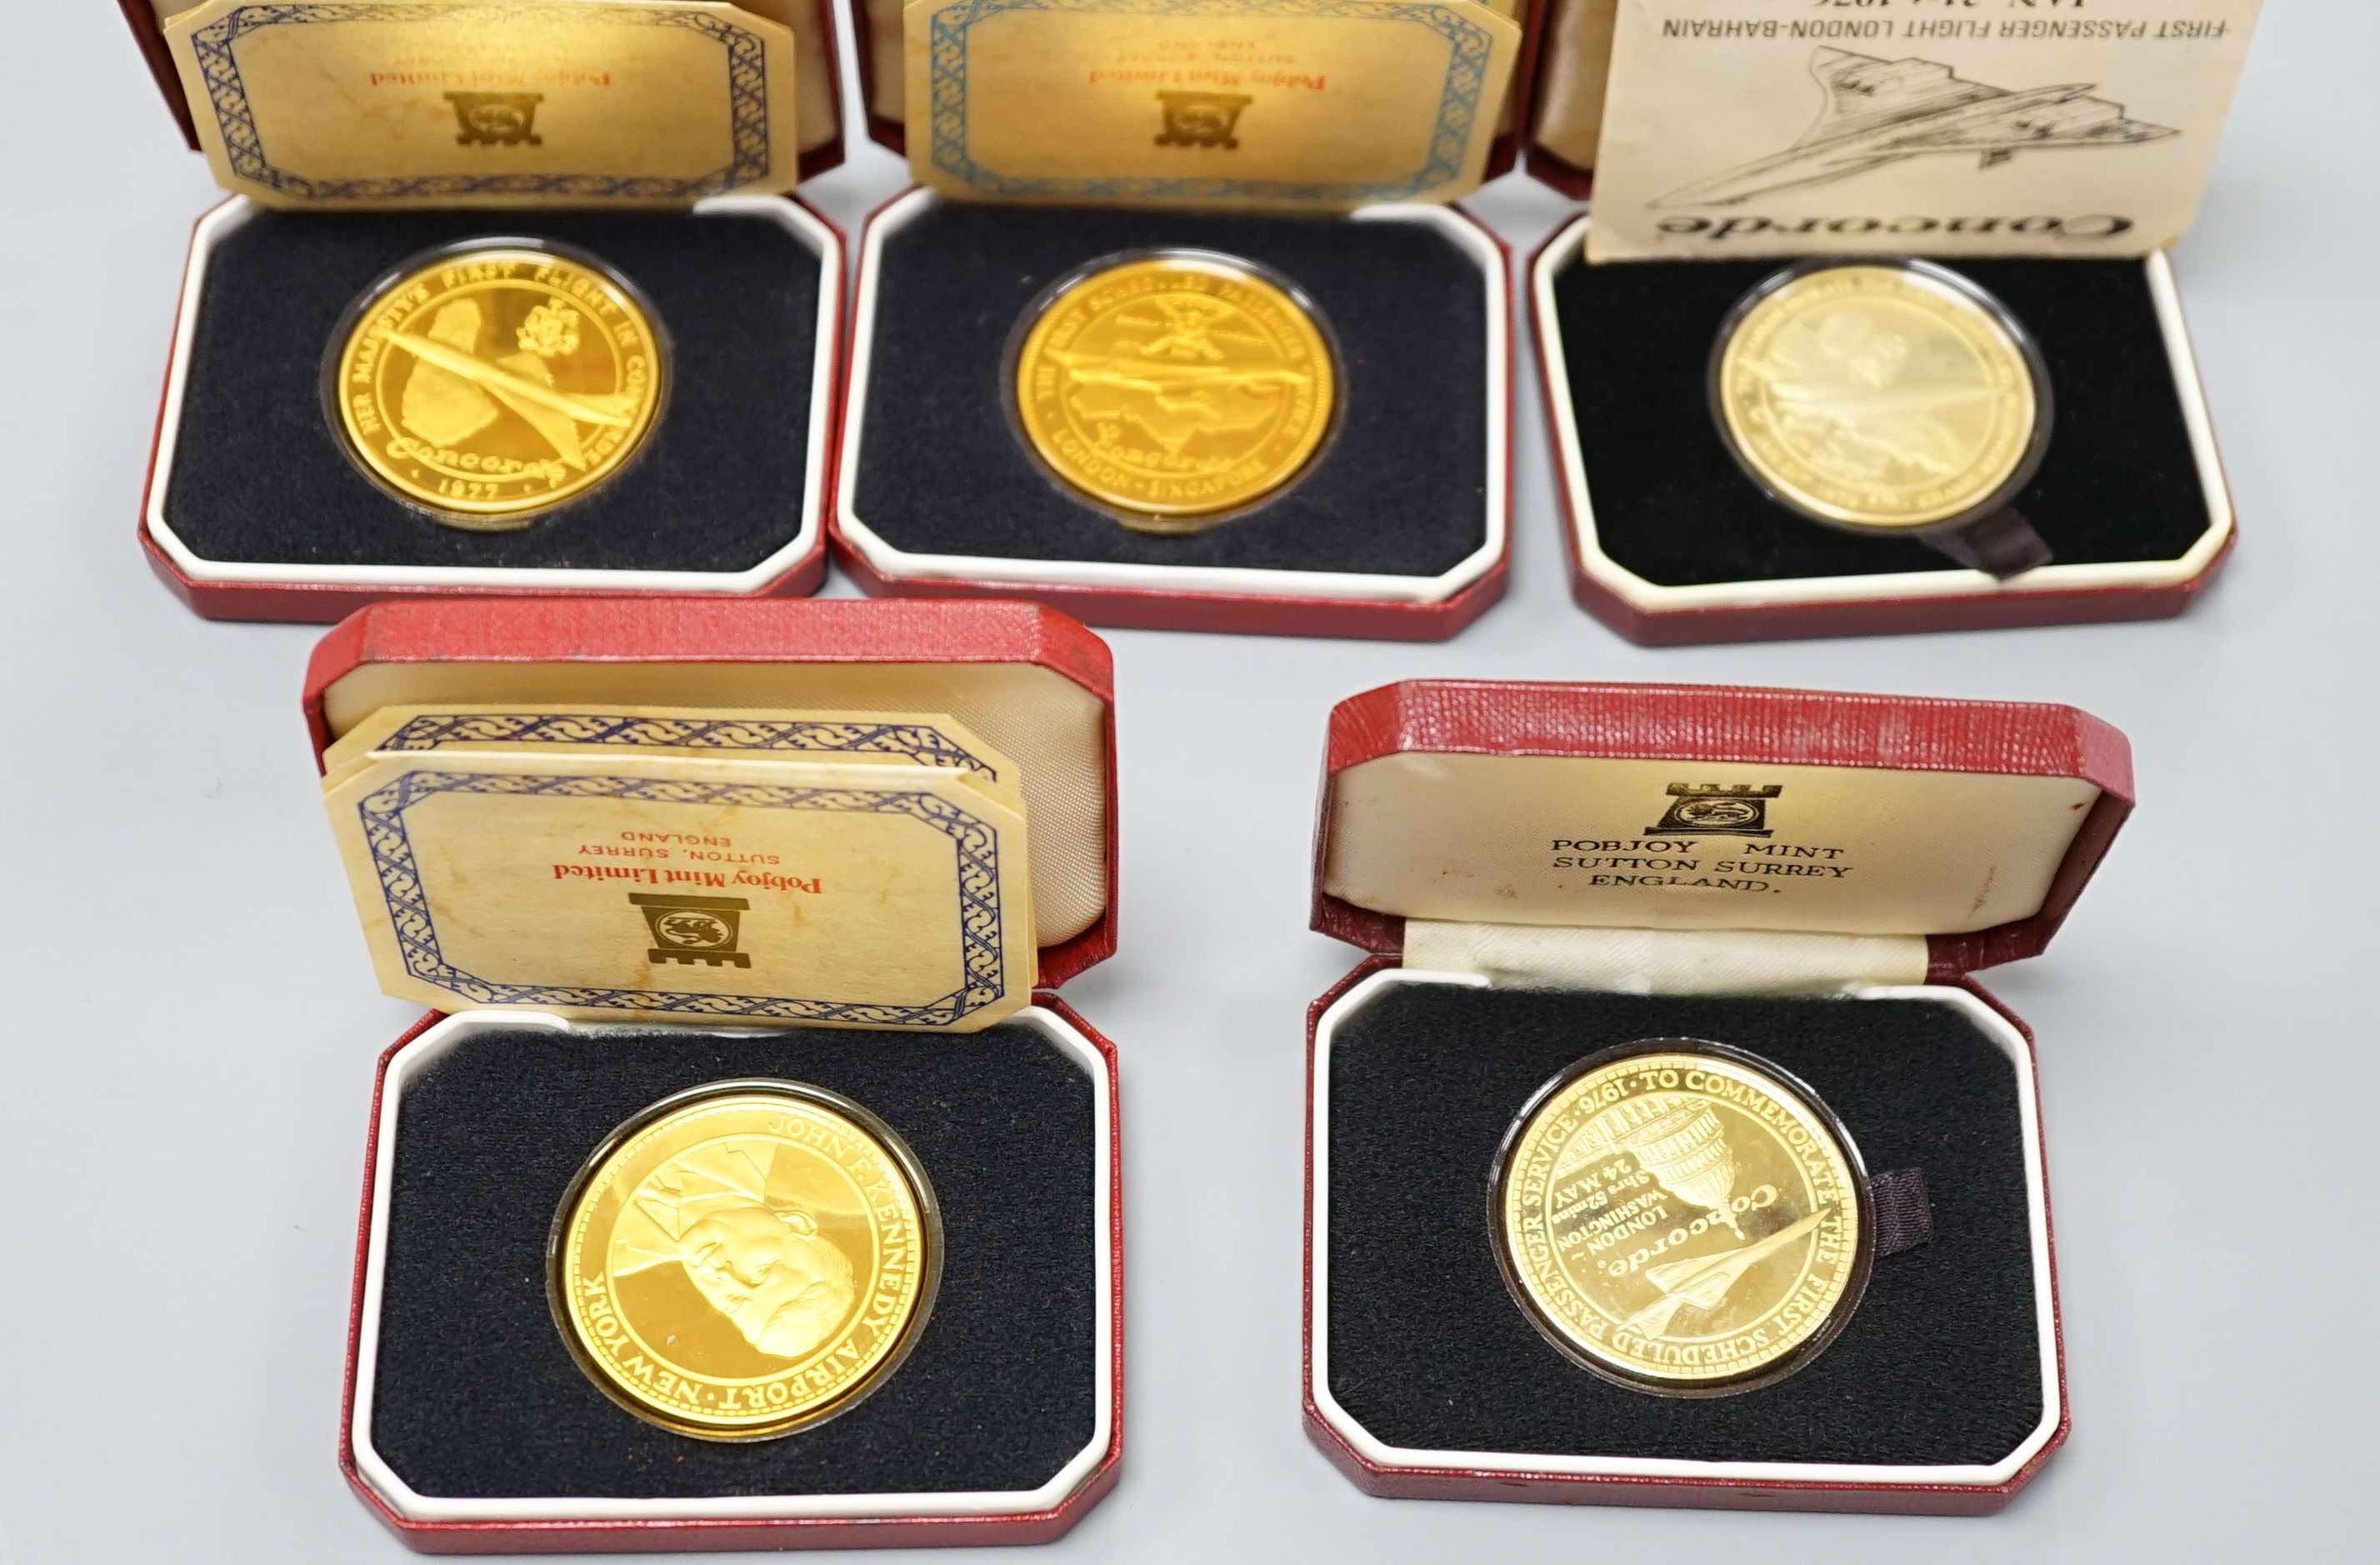 Five assorted cased Pobjoy Mint silver gilt Crown medals struck to commemorate first flights of Concorde, with certificates